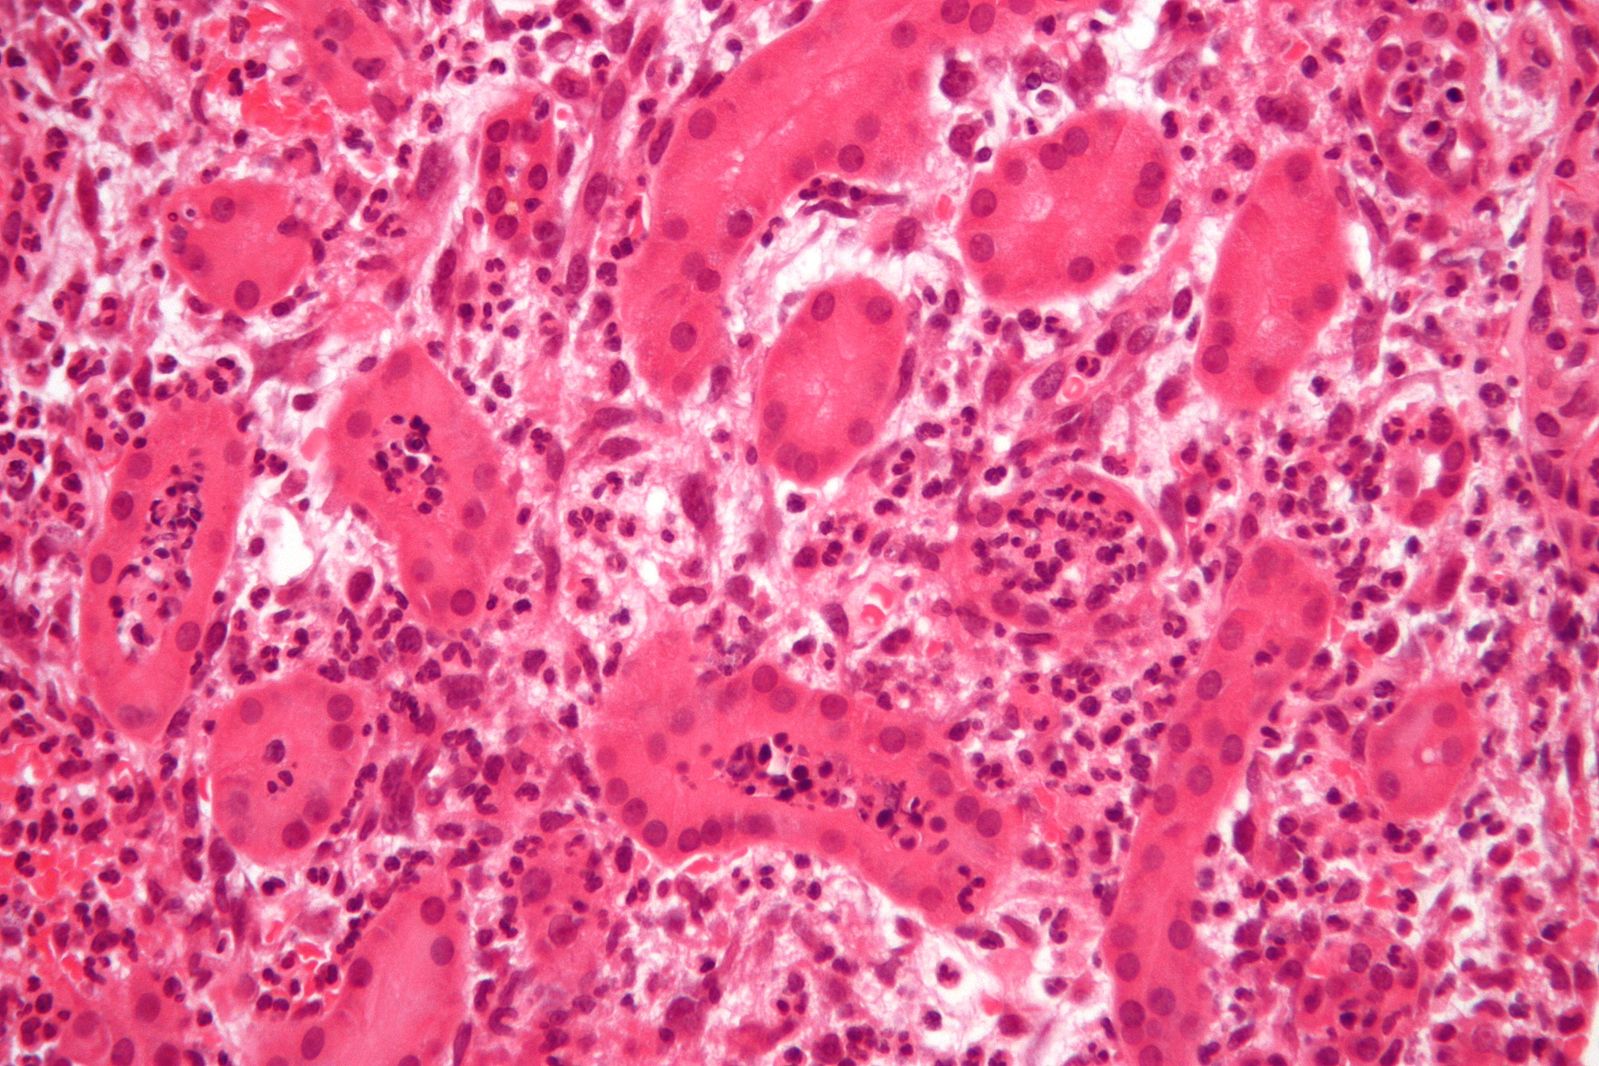 Acute Pyelonephritis with neutrophils within the tables and interstitium. Source: Libre Pathology[17]